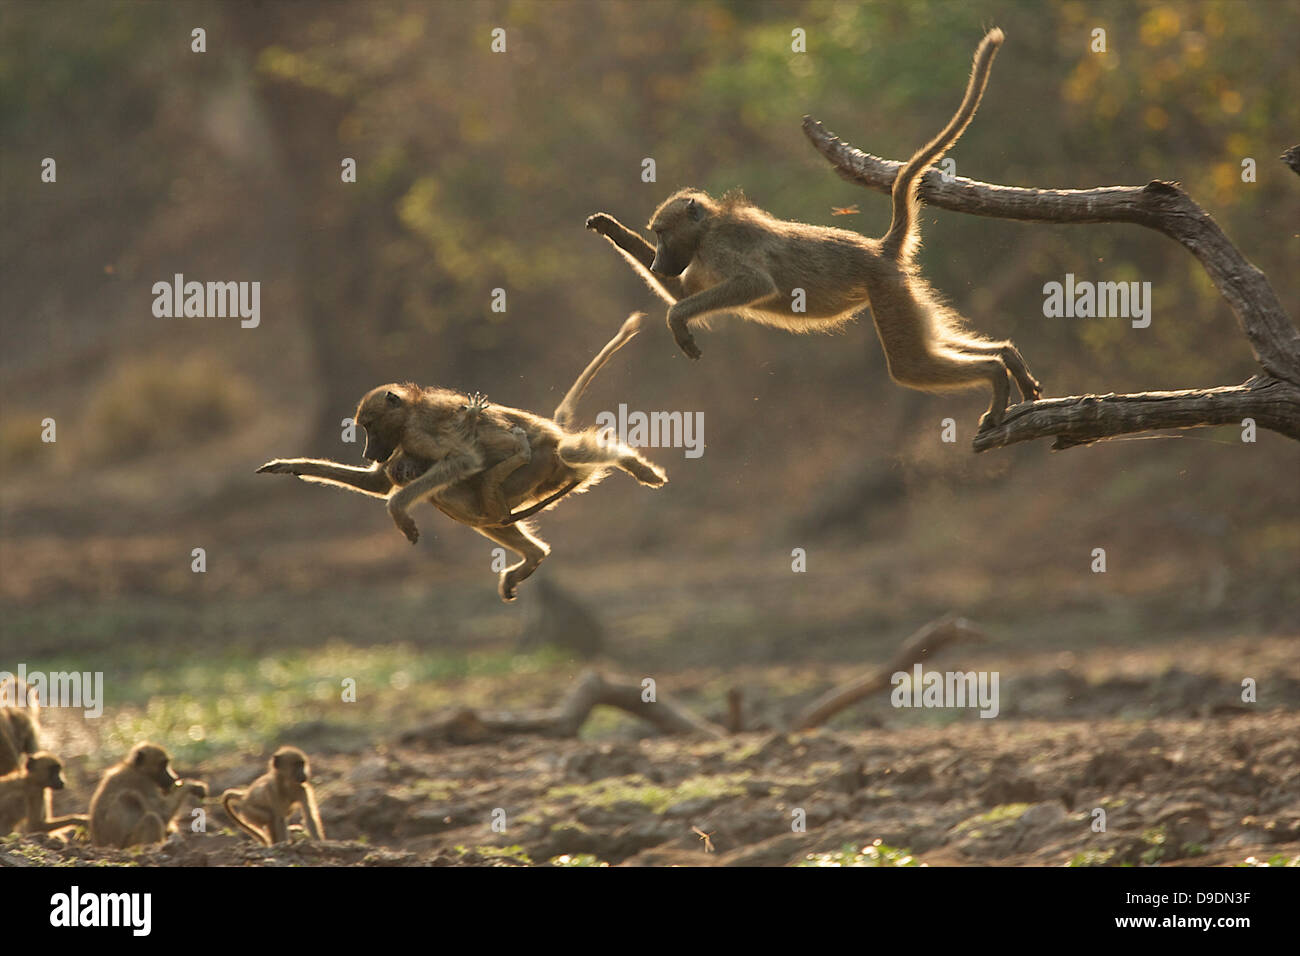 Baboons leaping from branch, Mana Pools National Park, Zimbabwe, Africa Stock Photo